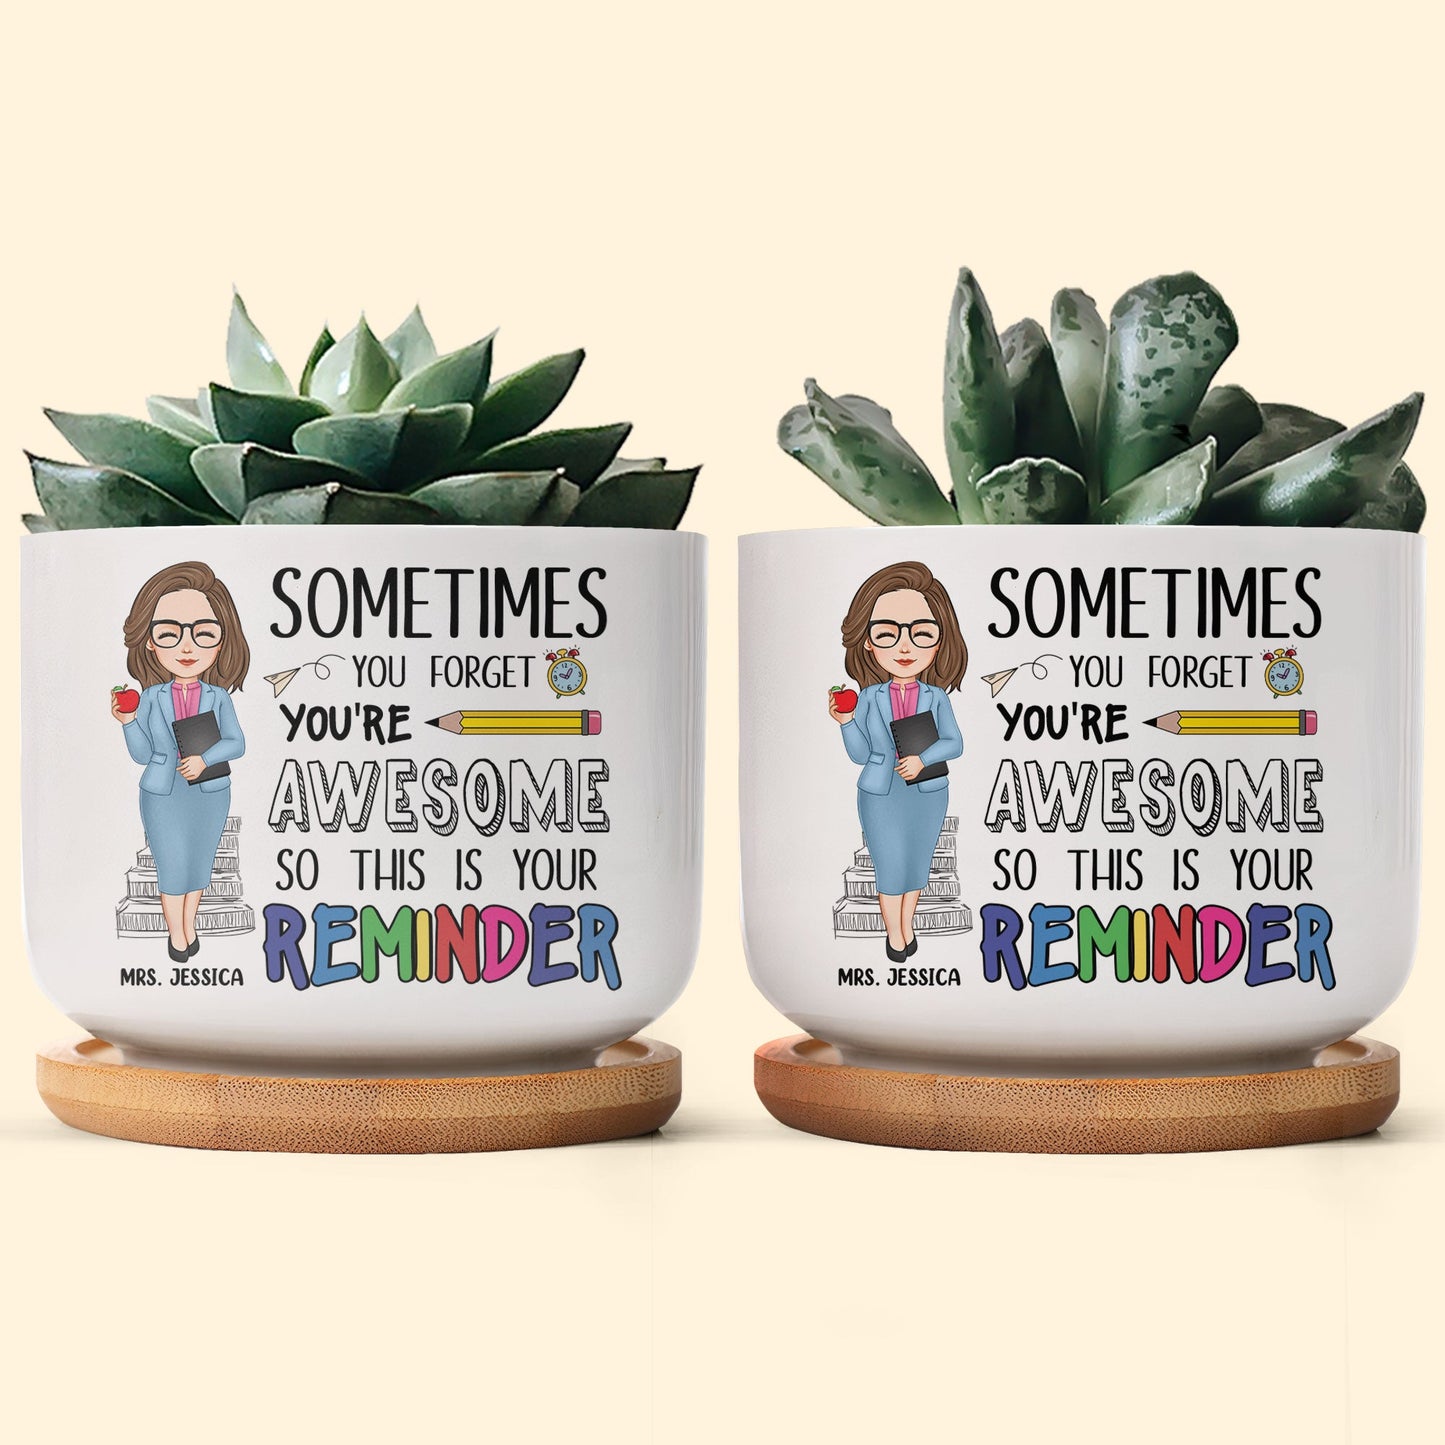 Sometimes You Forget You Are Awesome - Personalized Ceramic Plant Pot